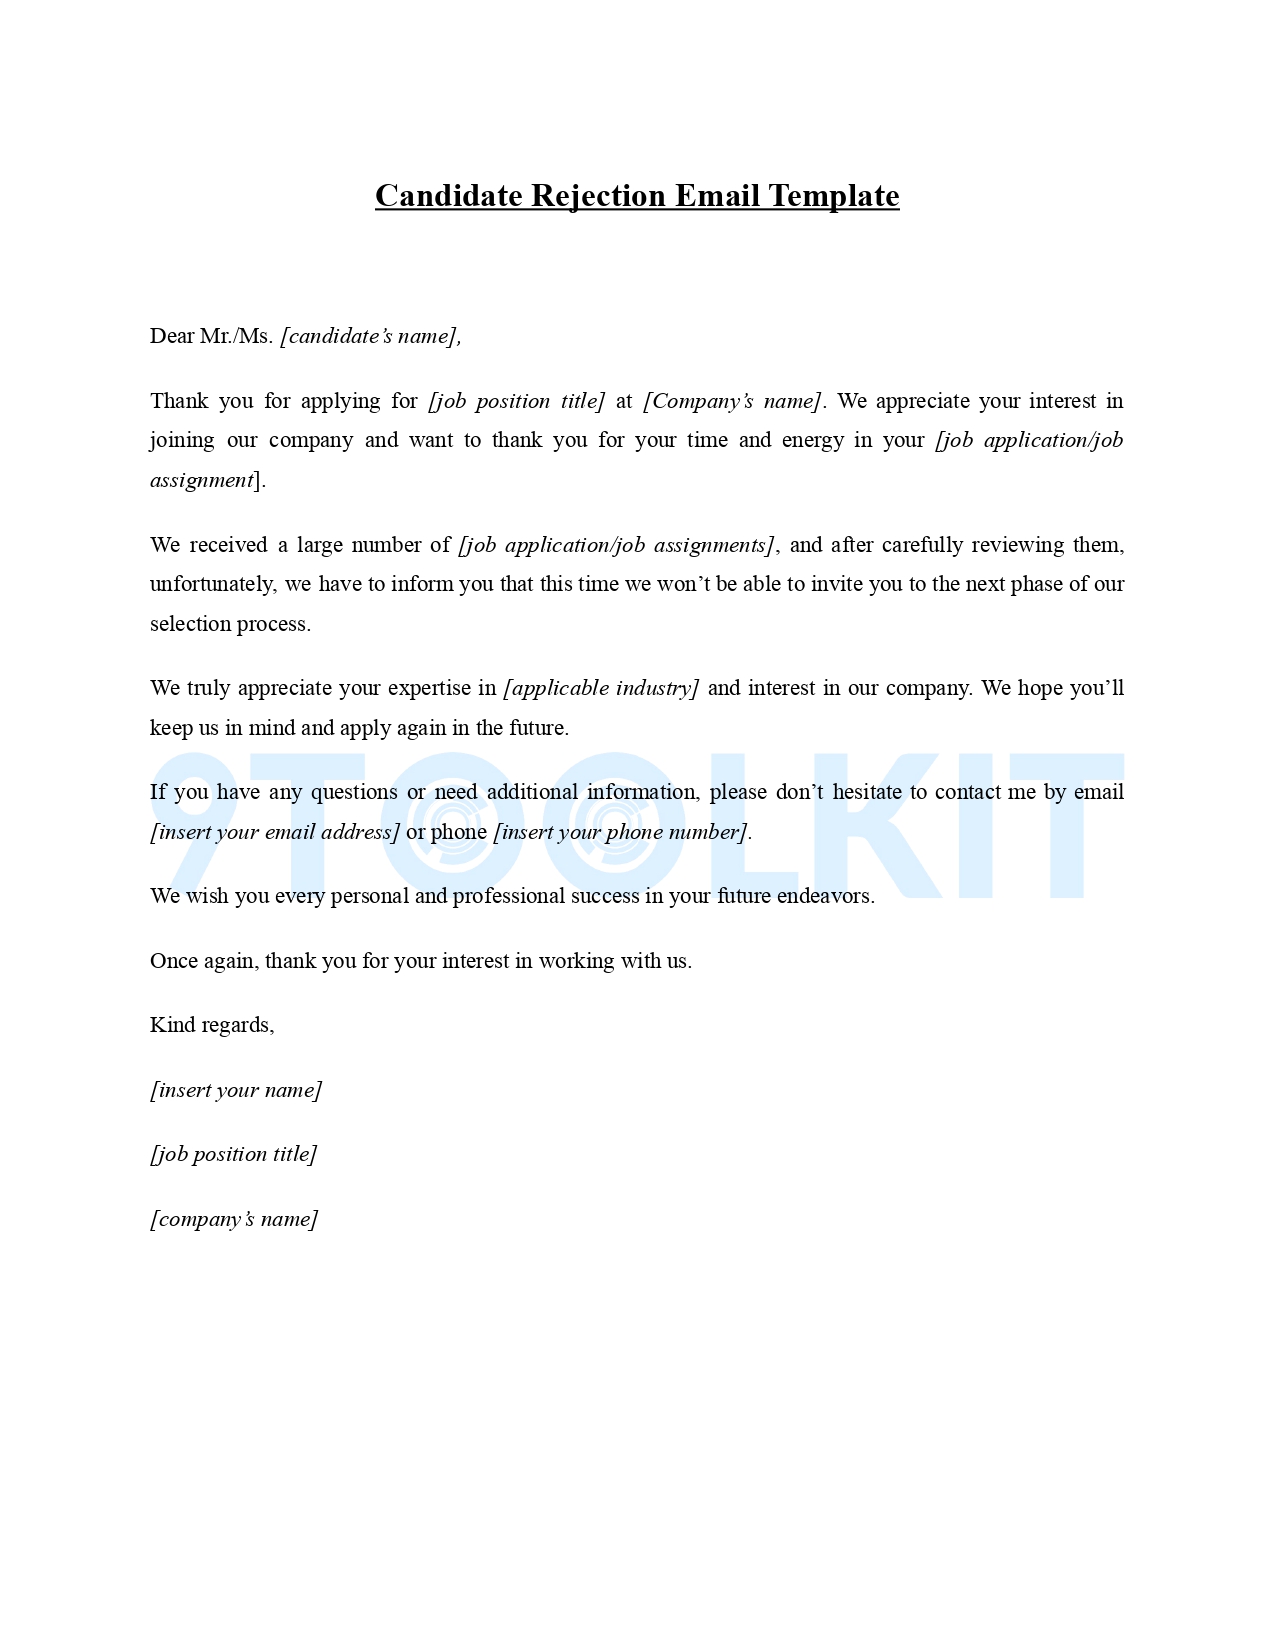 CANDIDATE REJECTION EMAIL TEMPLATE